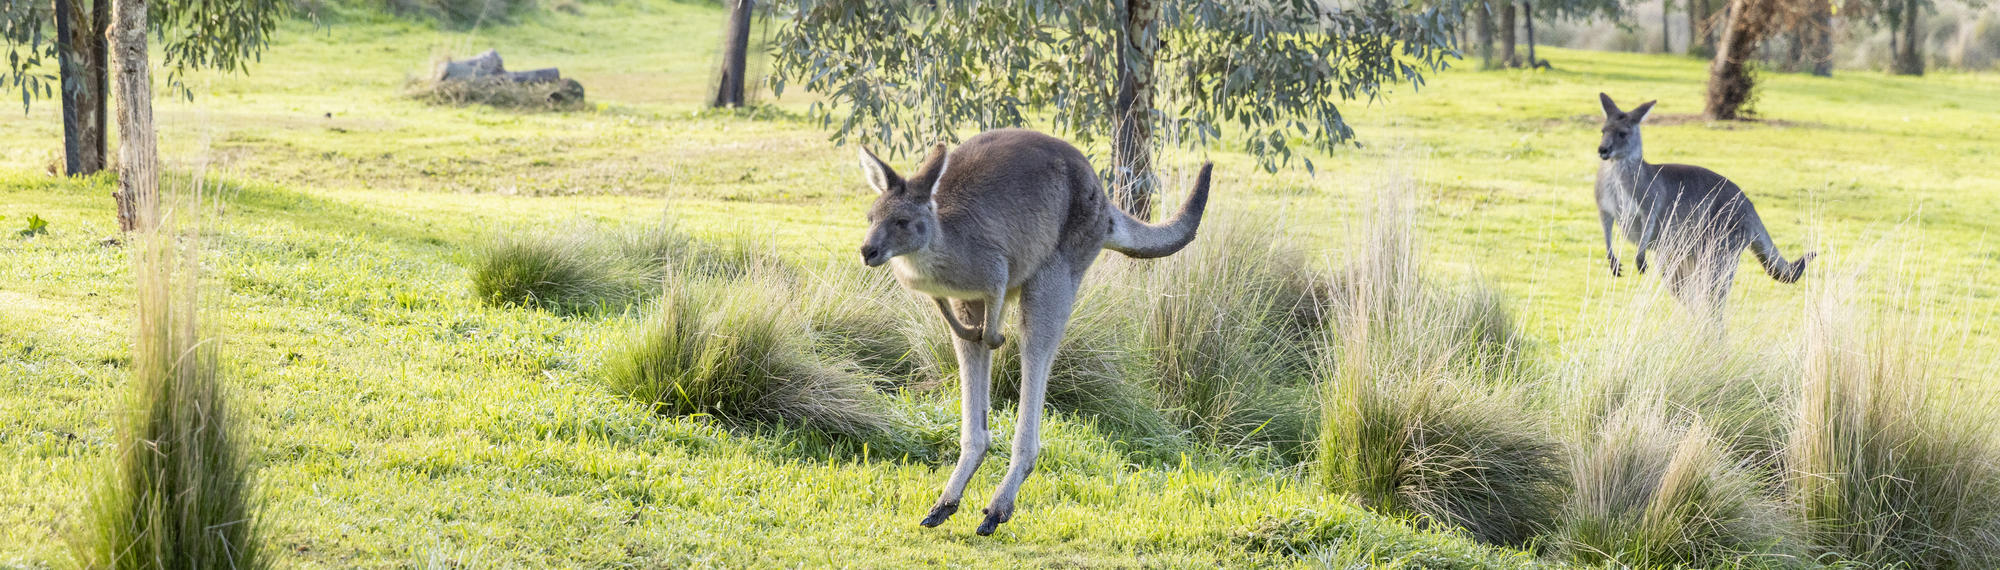 Two kangaroos jumping through short and long green grass. Trees in background.